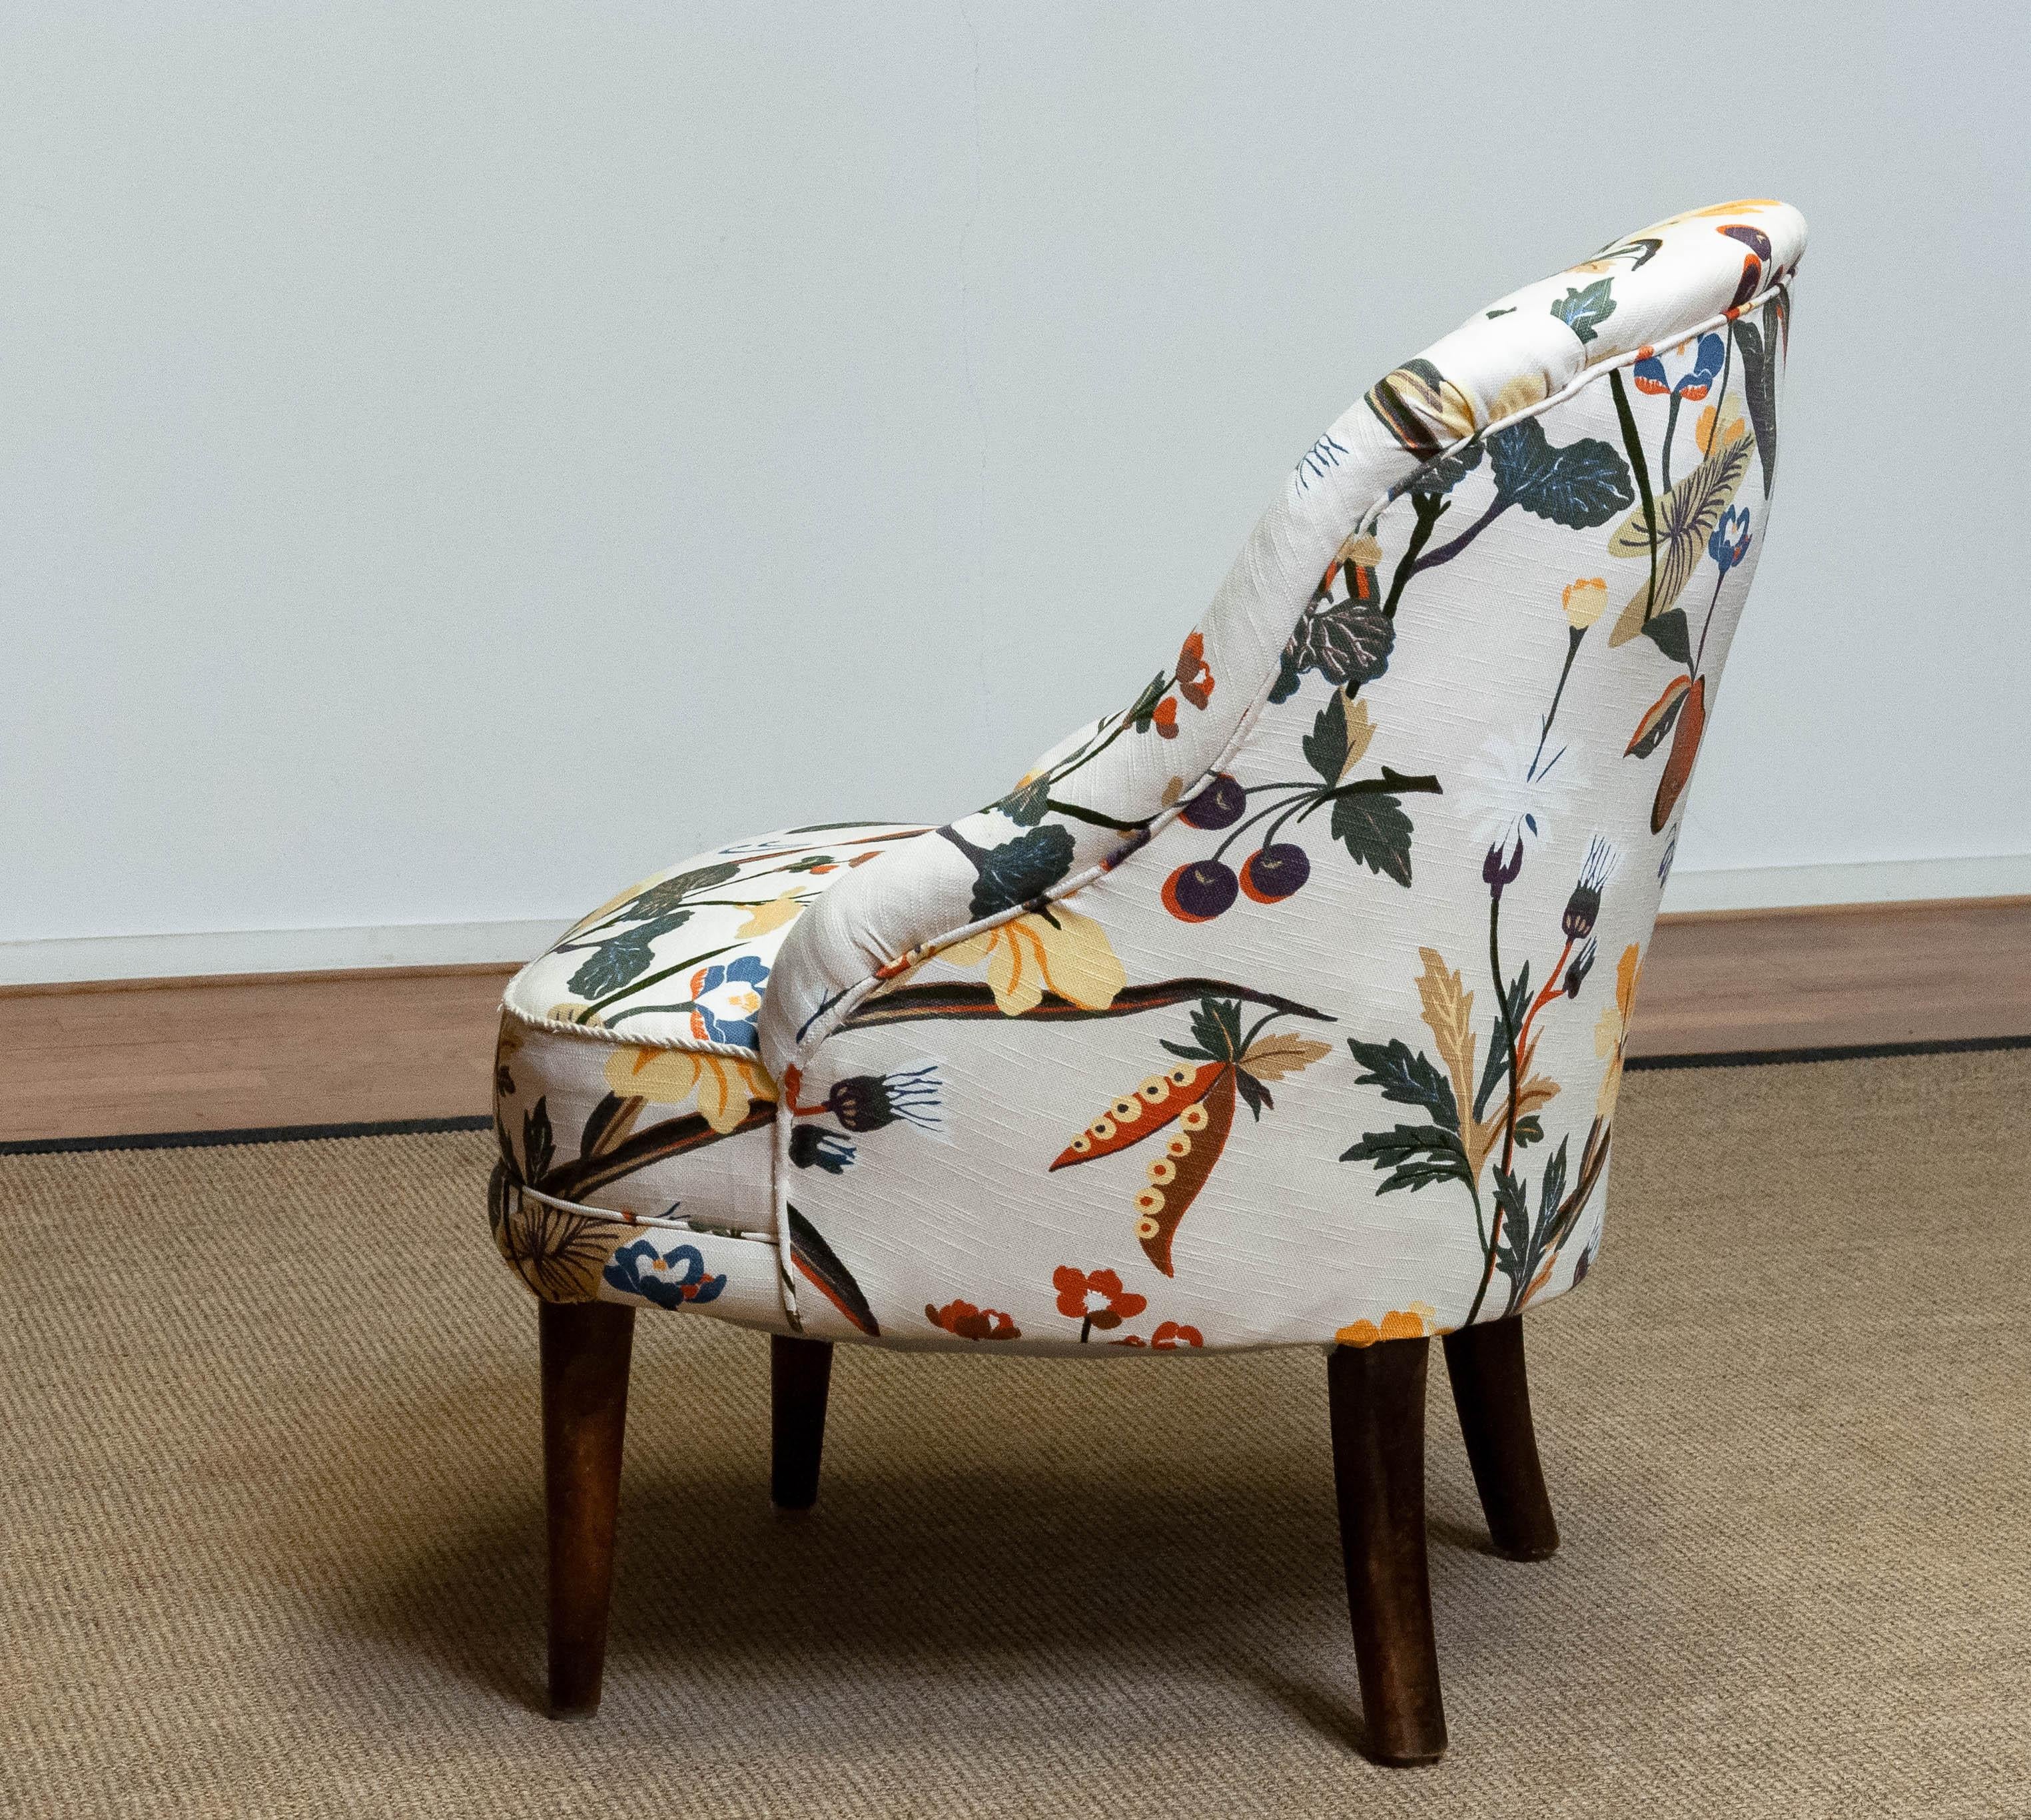 1940s Floral Printed Linen, J. Frank Style, New Upholstered Danish Slipper Chair In Good Condition For Sale In Silvolde, Gelderland